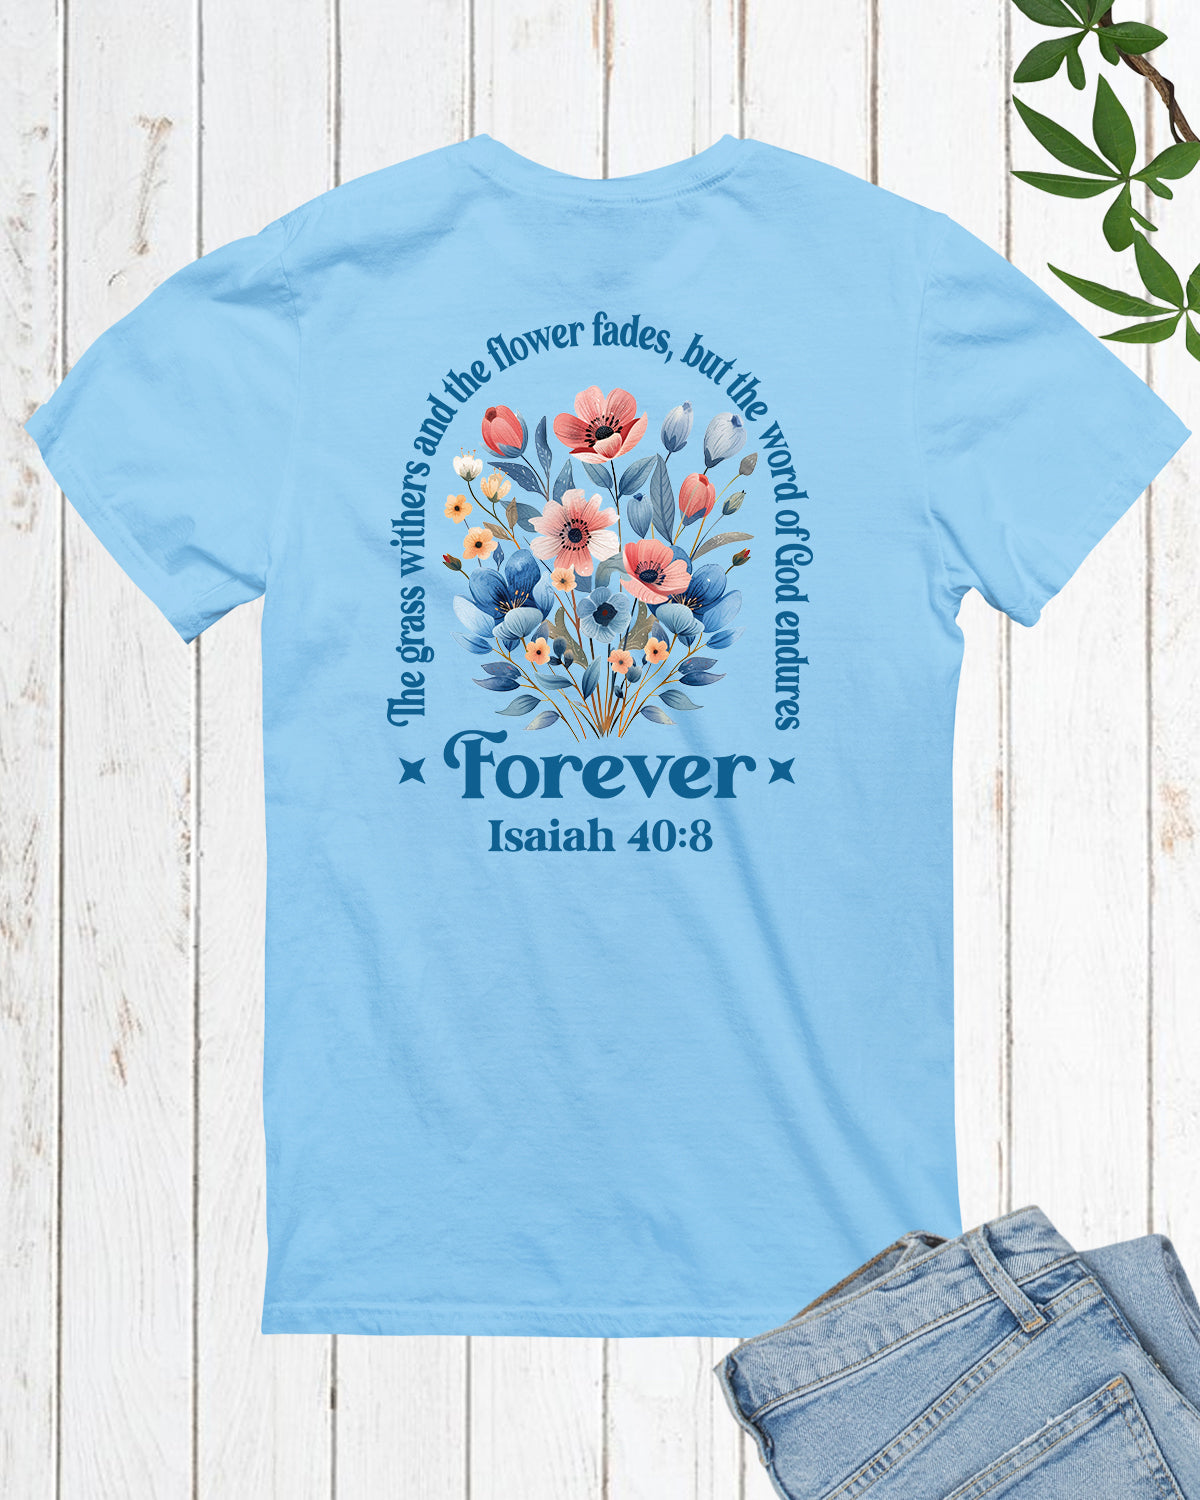 The Grass Withers and The Flower Fades, But The Word of God Endures Forever Christian Shirts